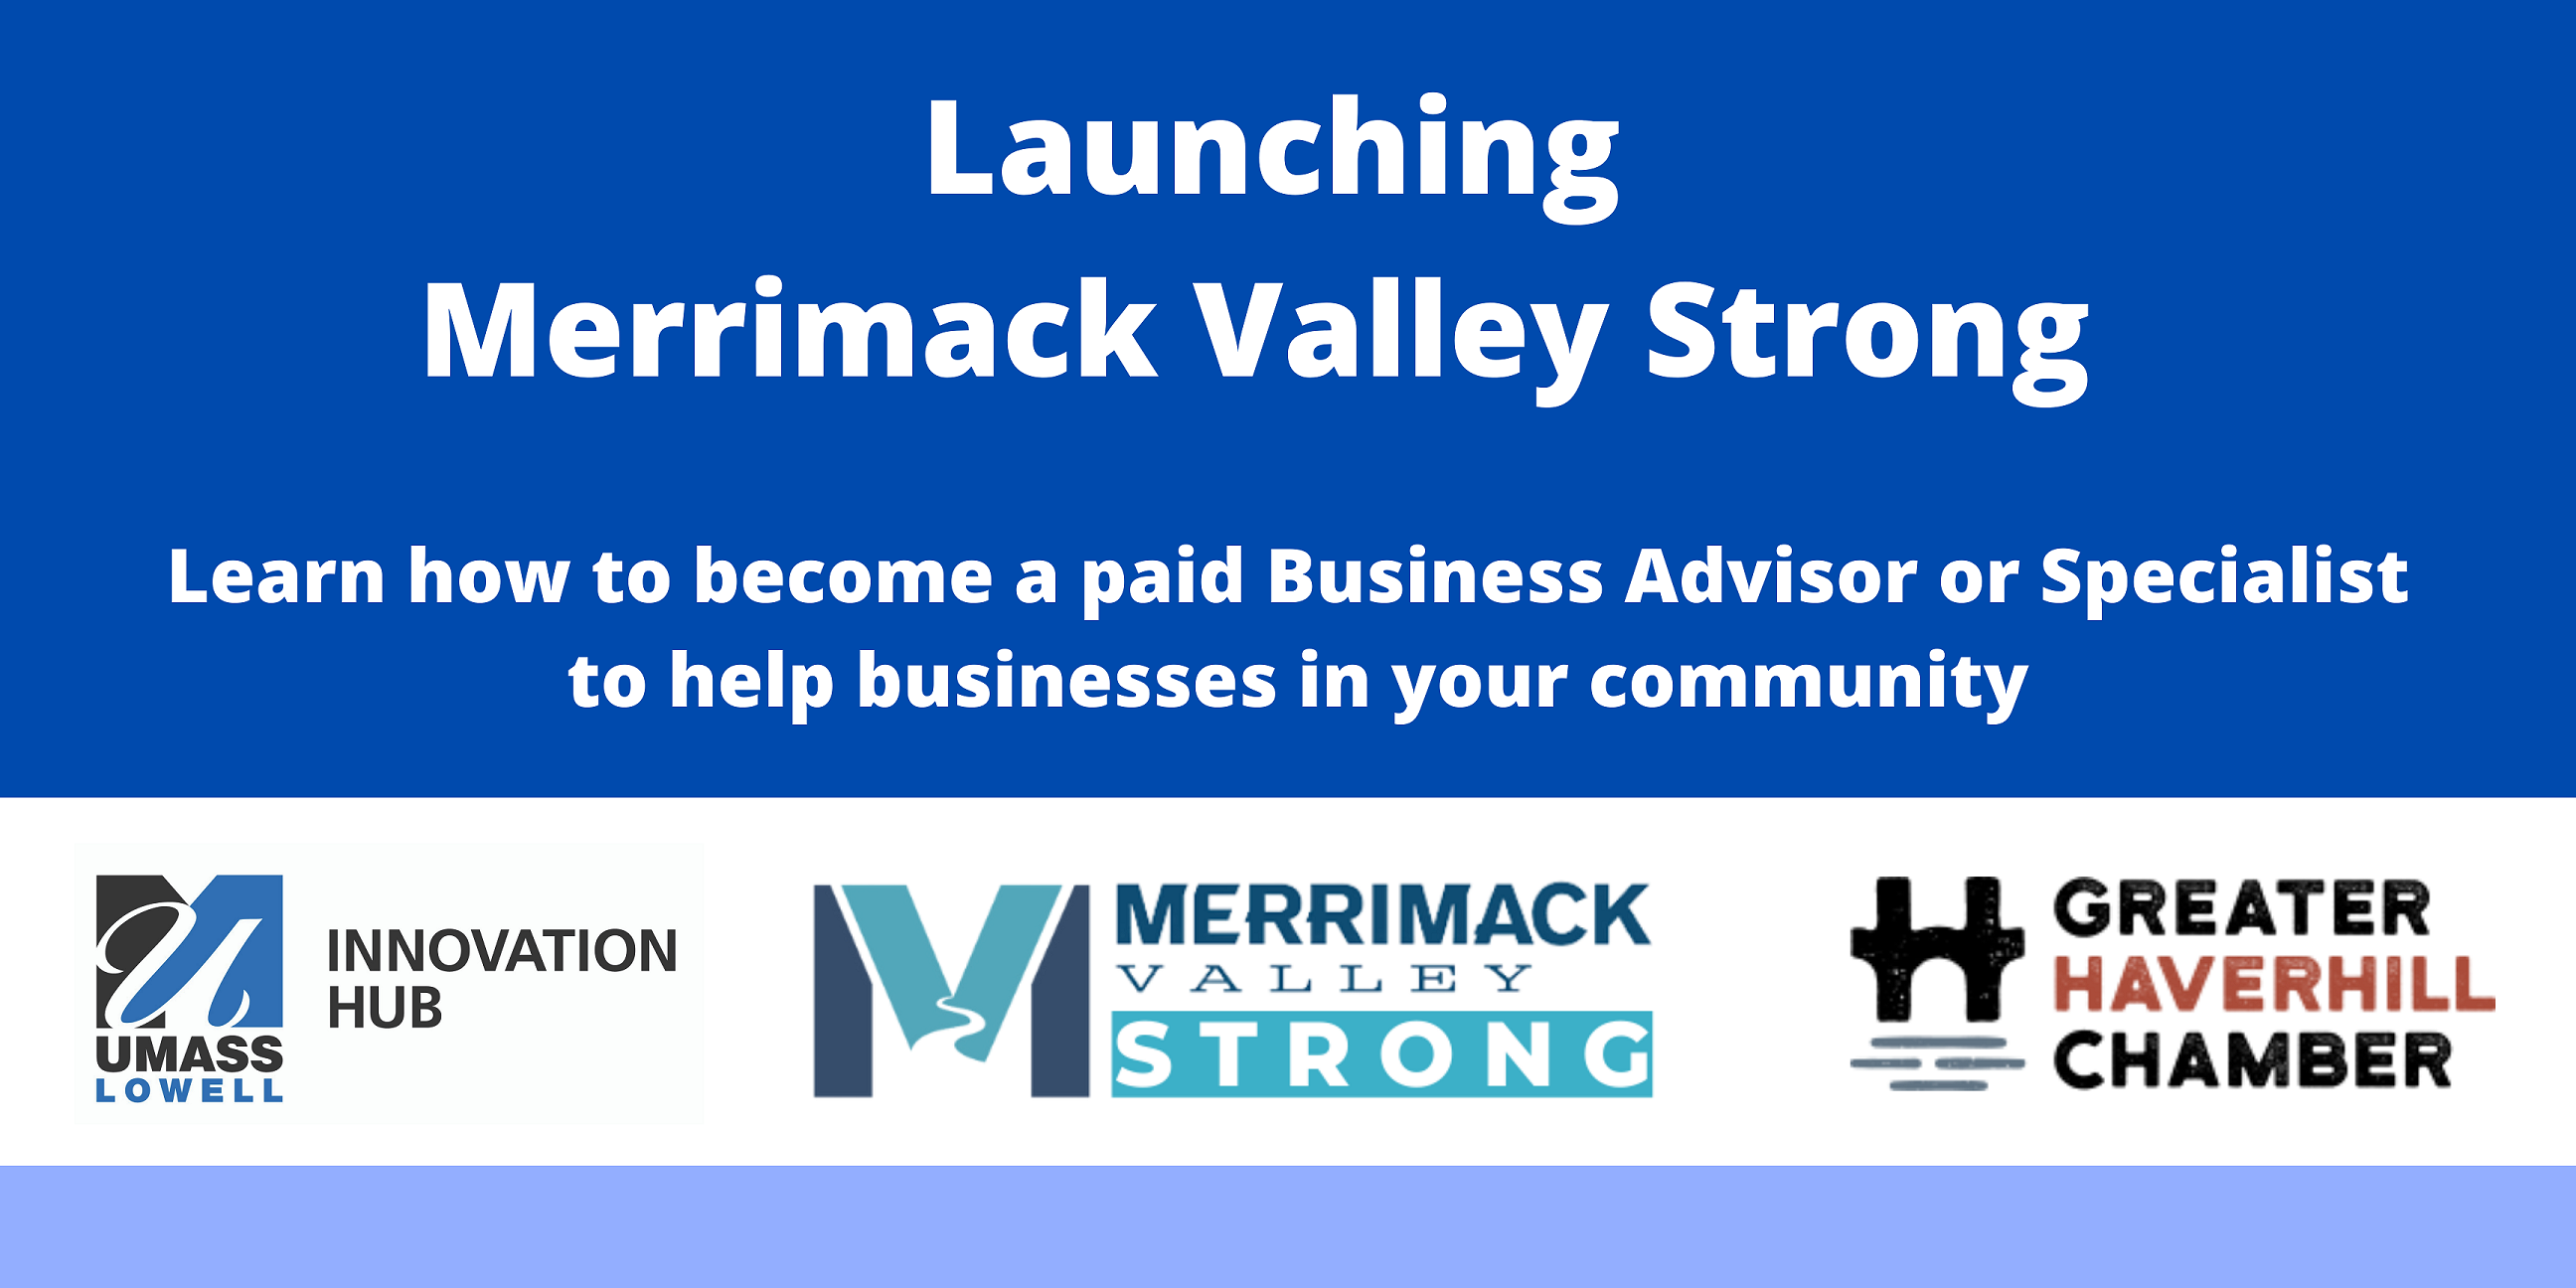 a graphic depicting the details of Merrimack Valley Strong